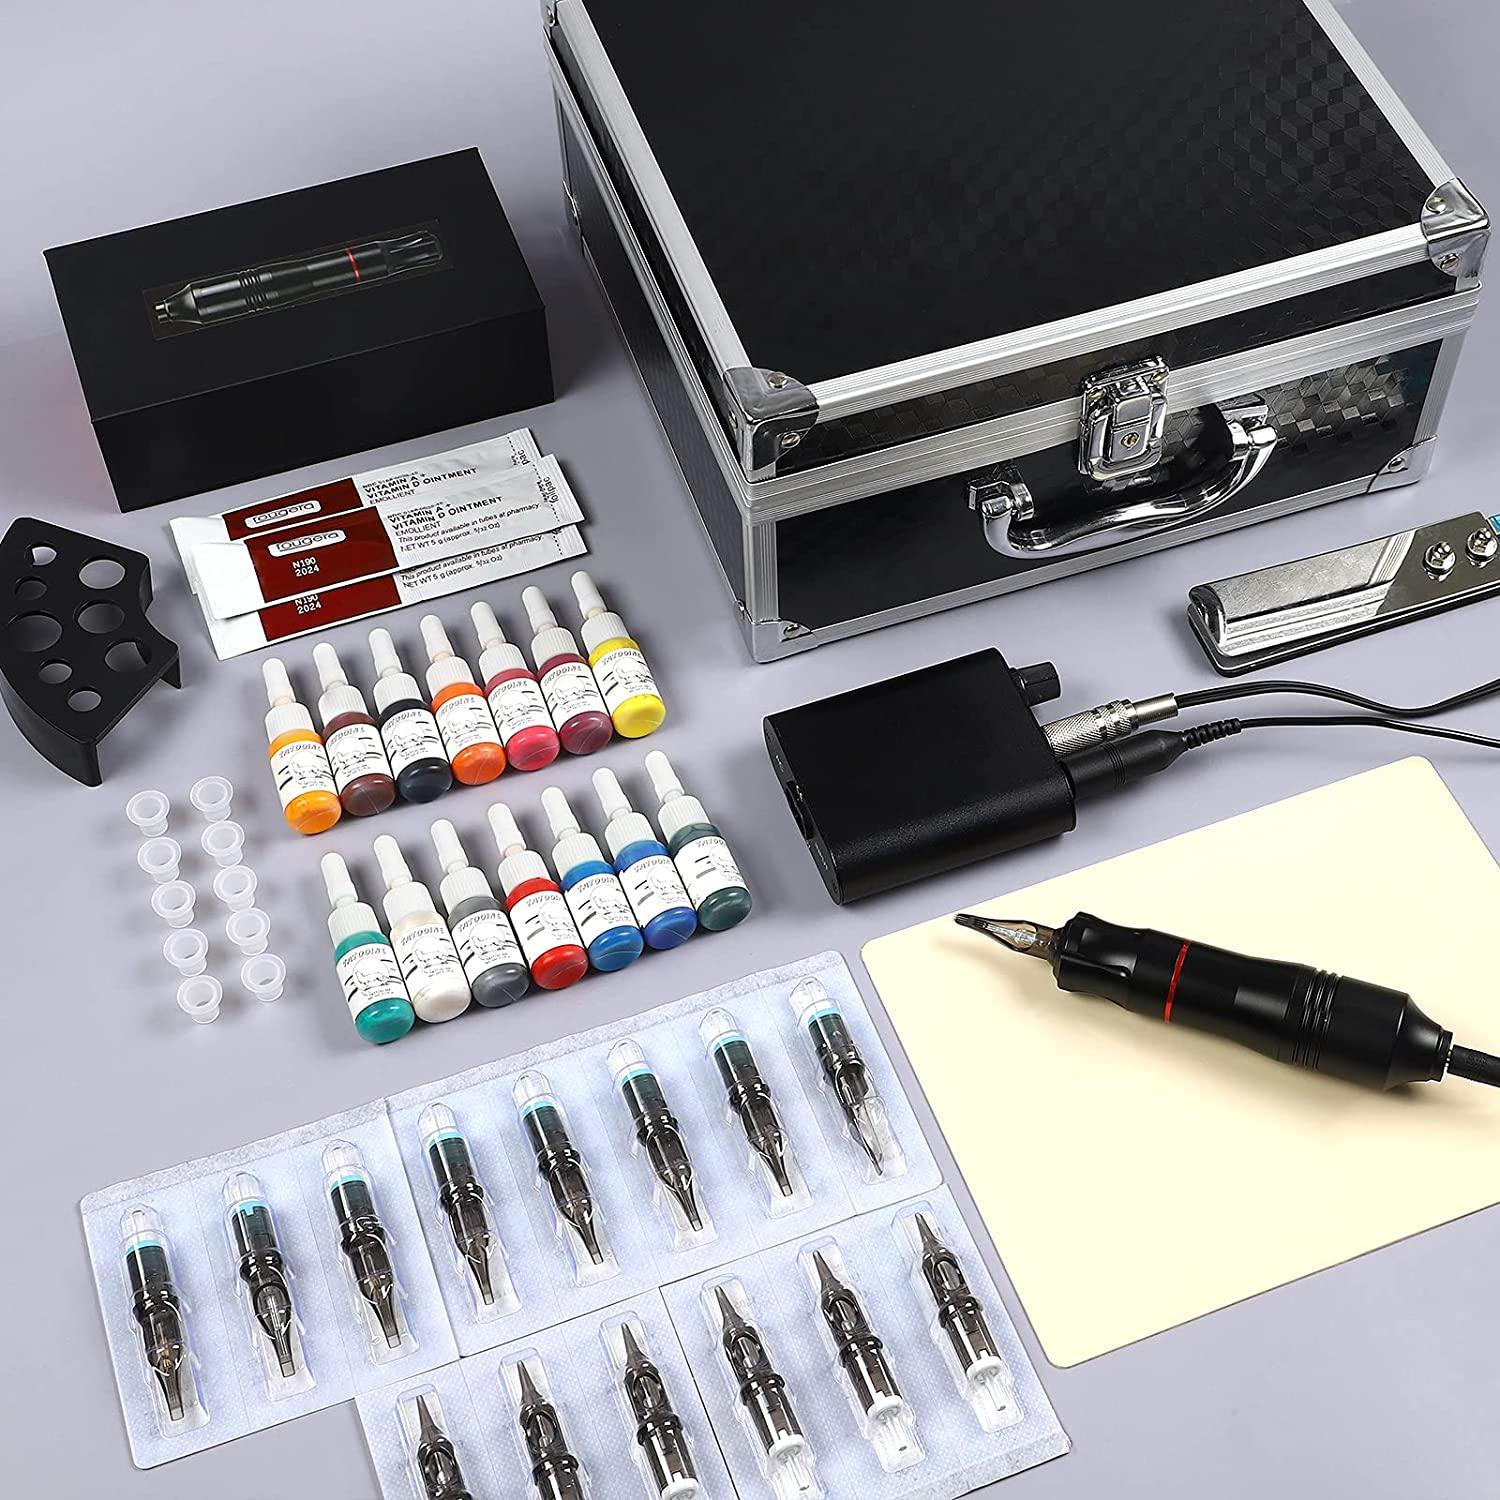 Find Permanent And Temporary Wholesale tattoo machine kits sale   Alibabacom